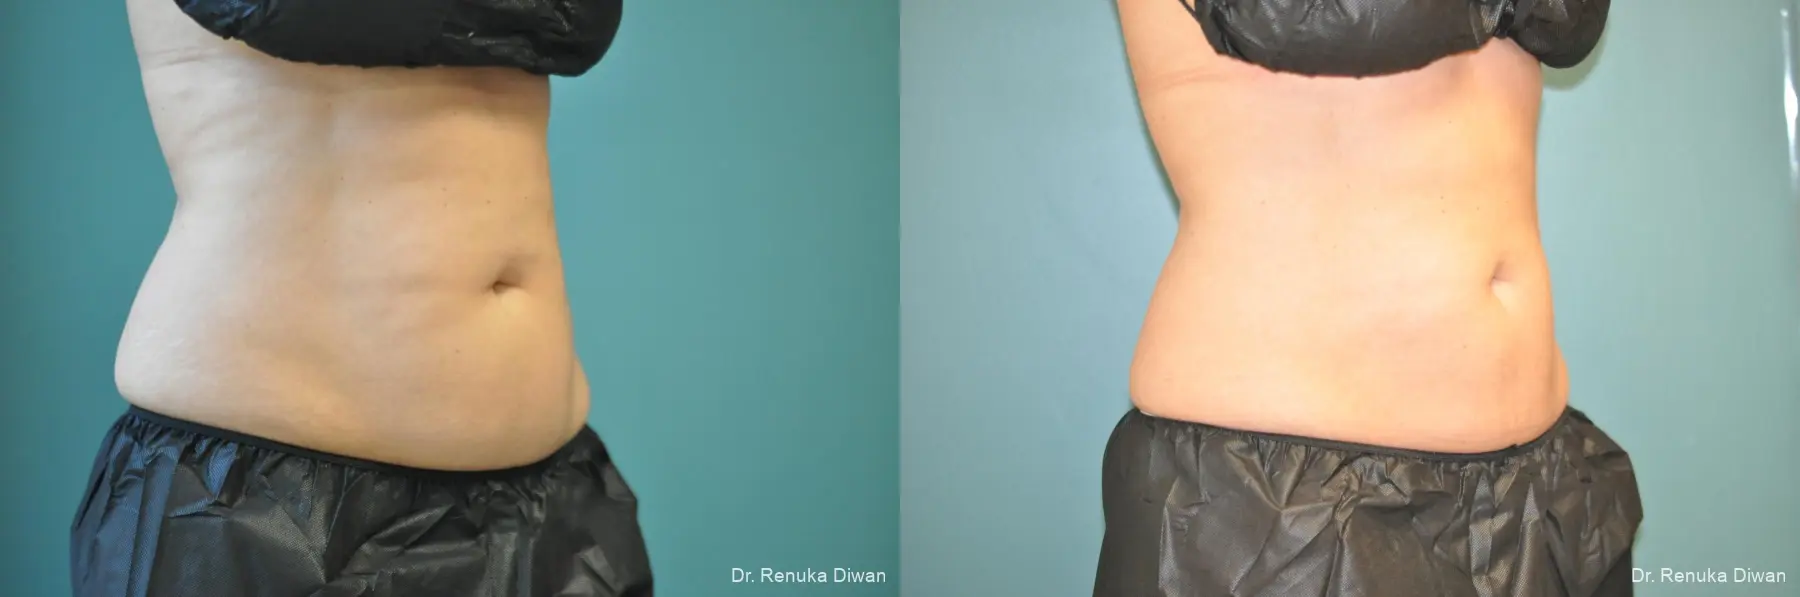 CoolSculpting®: Patient 4 - Before and After 2